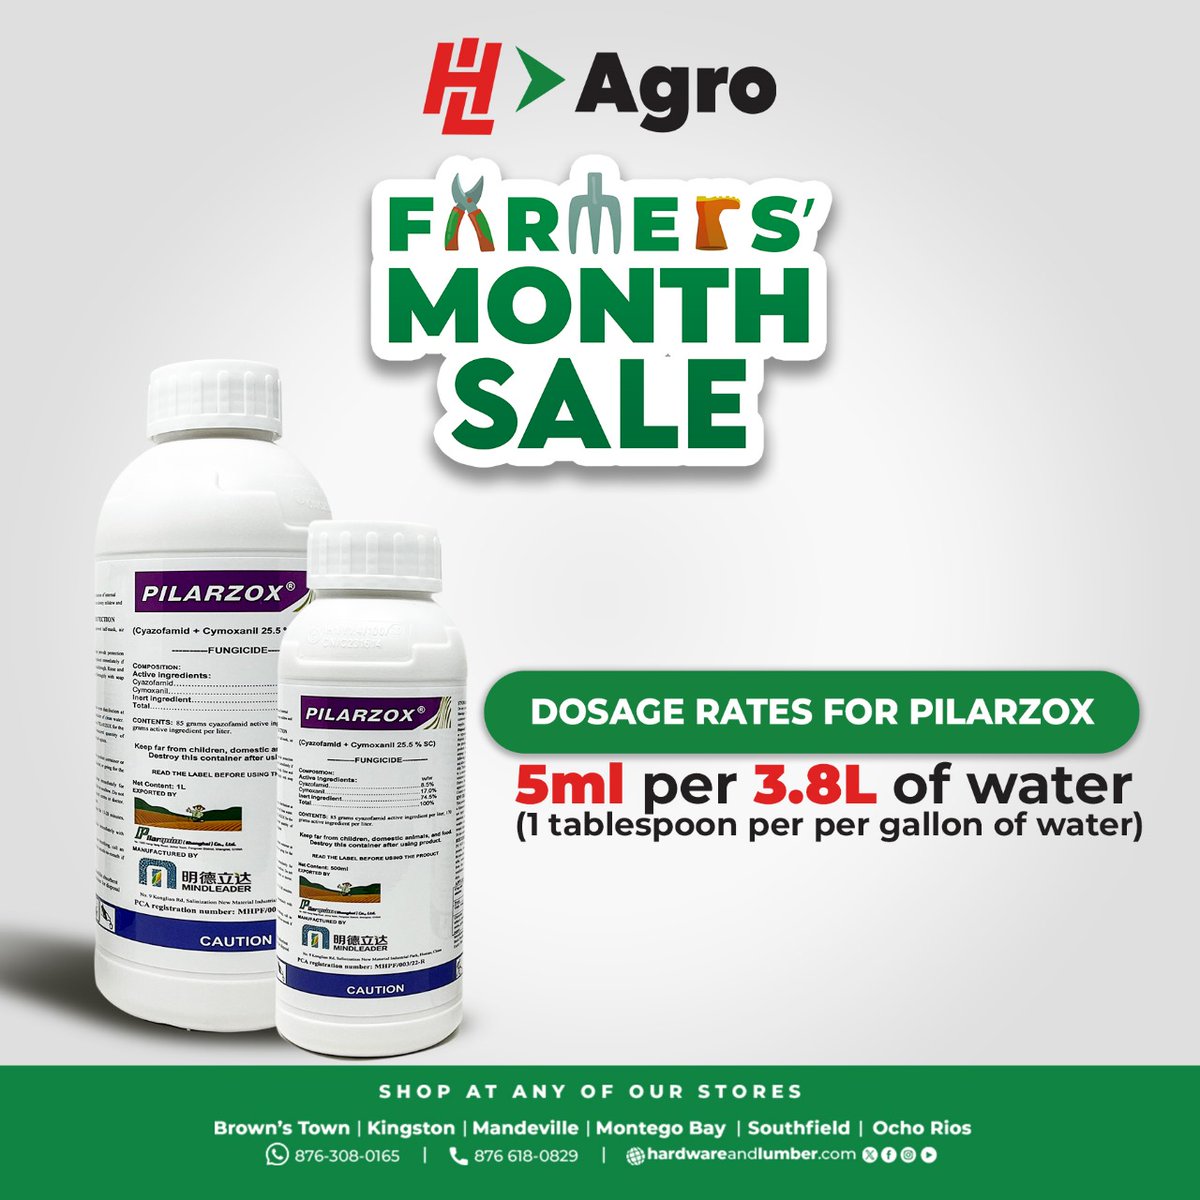 Don't miss out on this golden opportunity, farmers! Stock up for the season with Pilarzox Fungicides at a jaw-dropping 47% off during our Farmers' Month sale. Rush to our stores today and save big! #HLAgro #FarmersMonthSale #PilarquimFungicides #StockUpAndSave